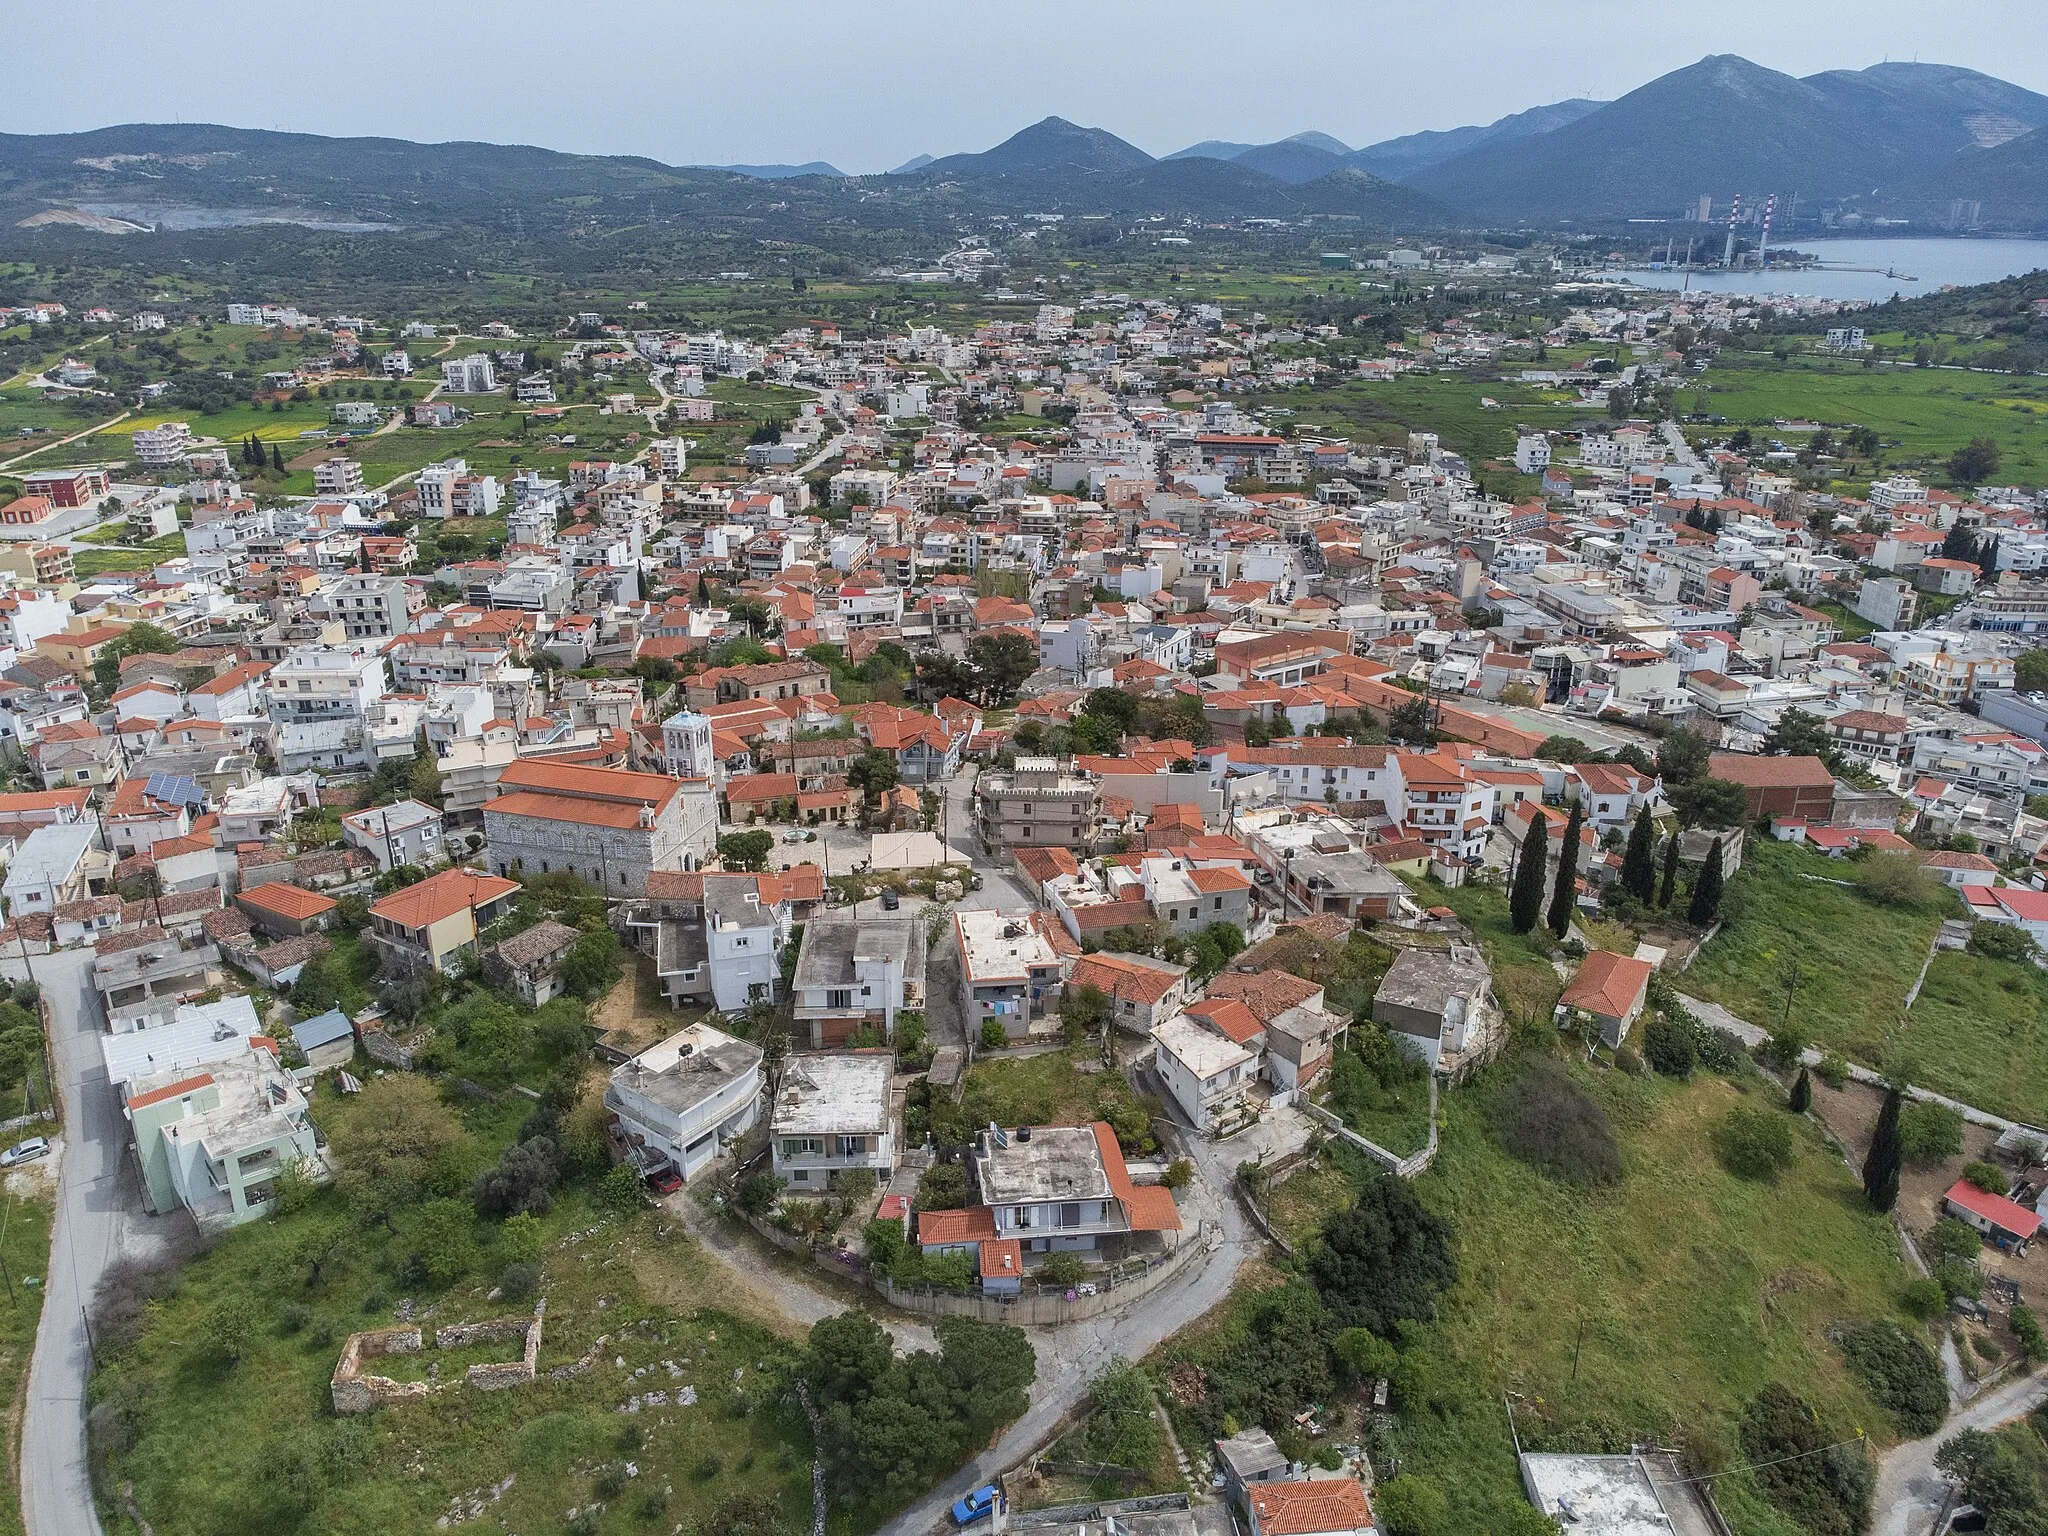 Photo showing: Aerial view of Aliveri, Euboea. On the small hill on the foreground lies the old part of the town and the background can be seen Karavos, where the electricity plant is located.